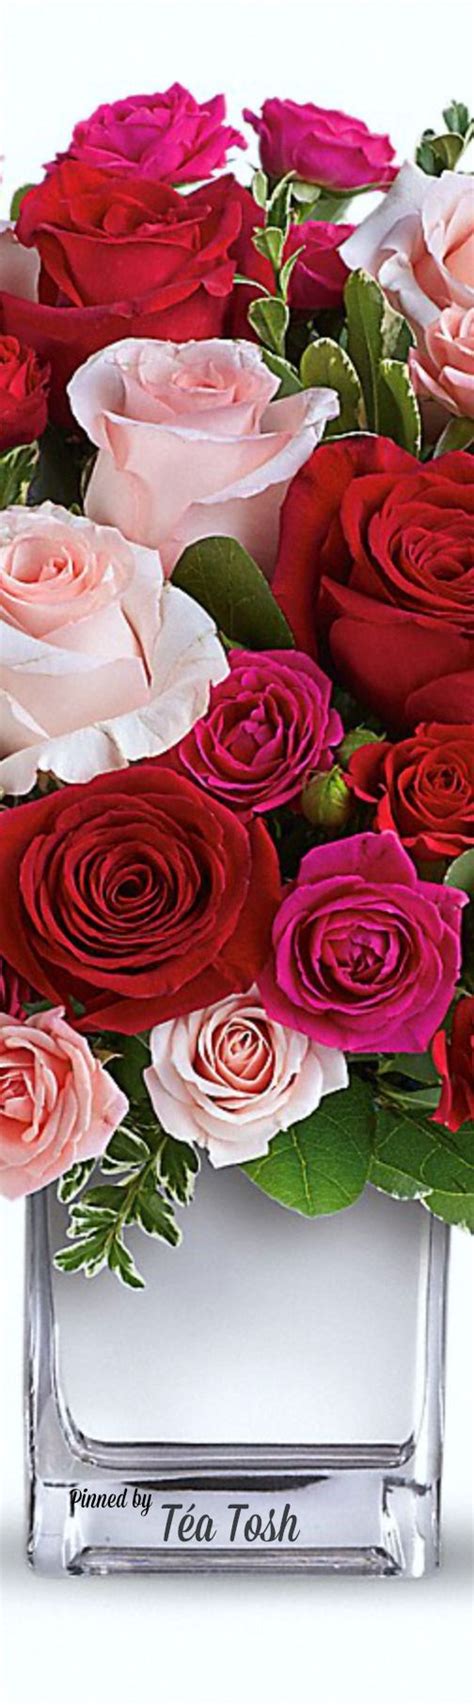 Téa Tosh Love Medley Bouquet W Red Roses Pink Rose Flower Birthday